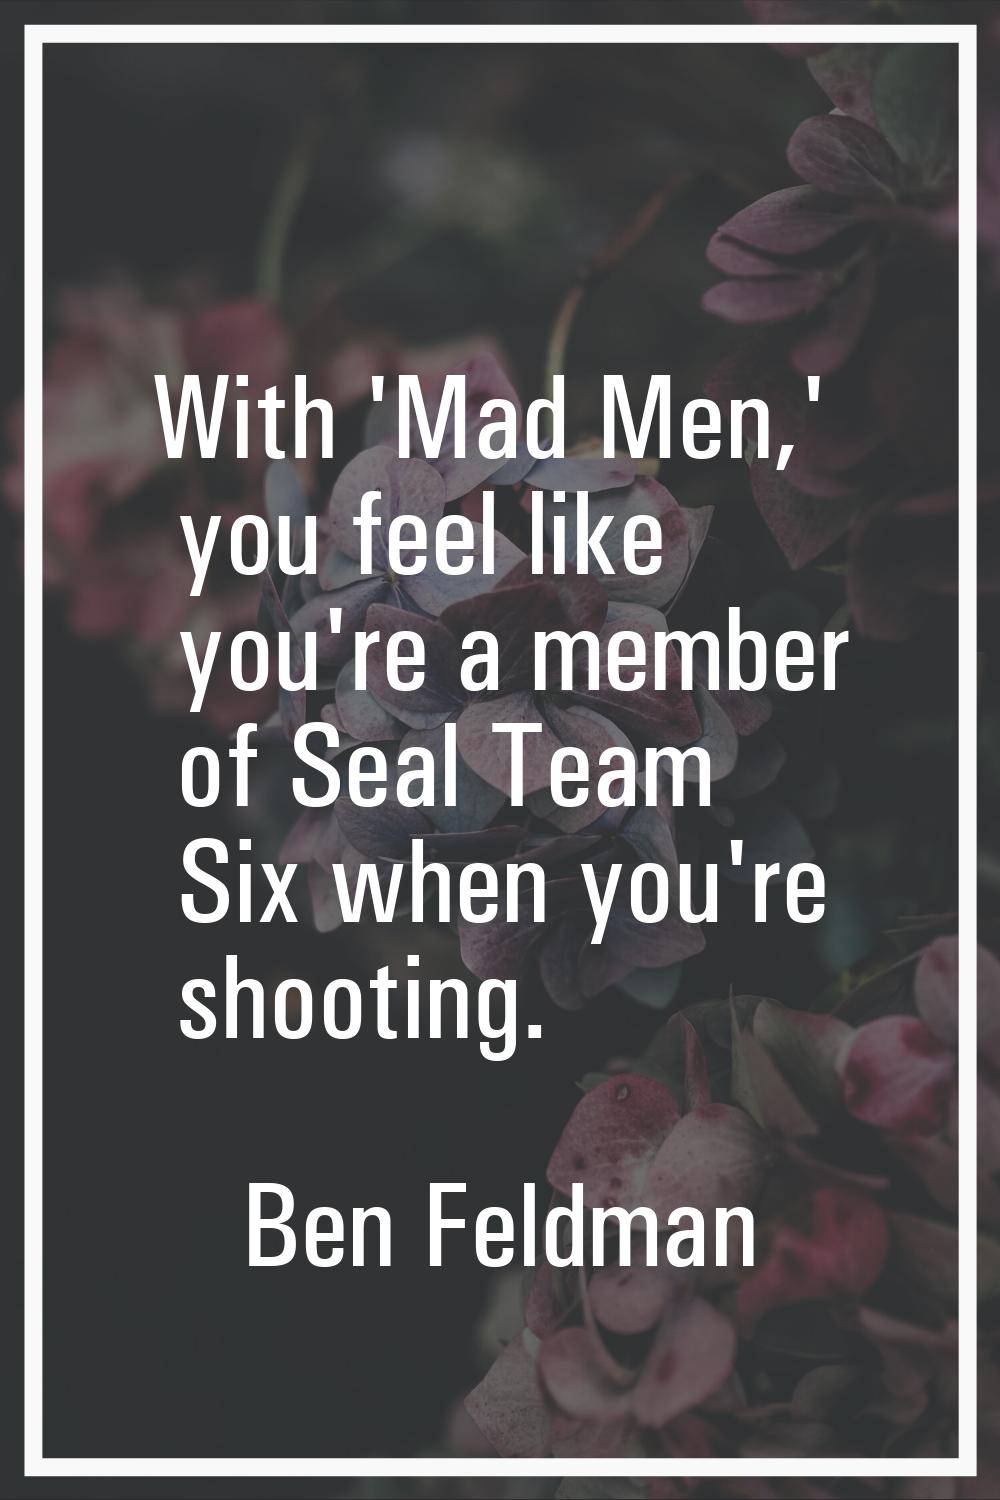 With 'Mad Men,' you feel like you're a member of Seal Team Six when you're shooting.